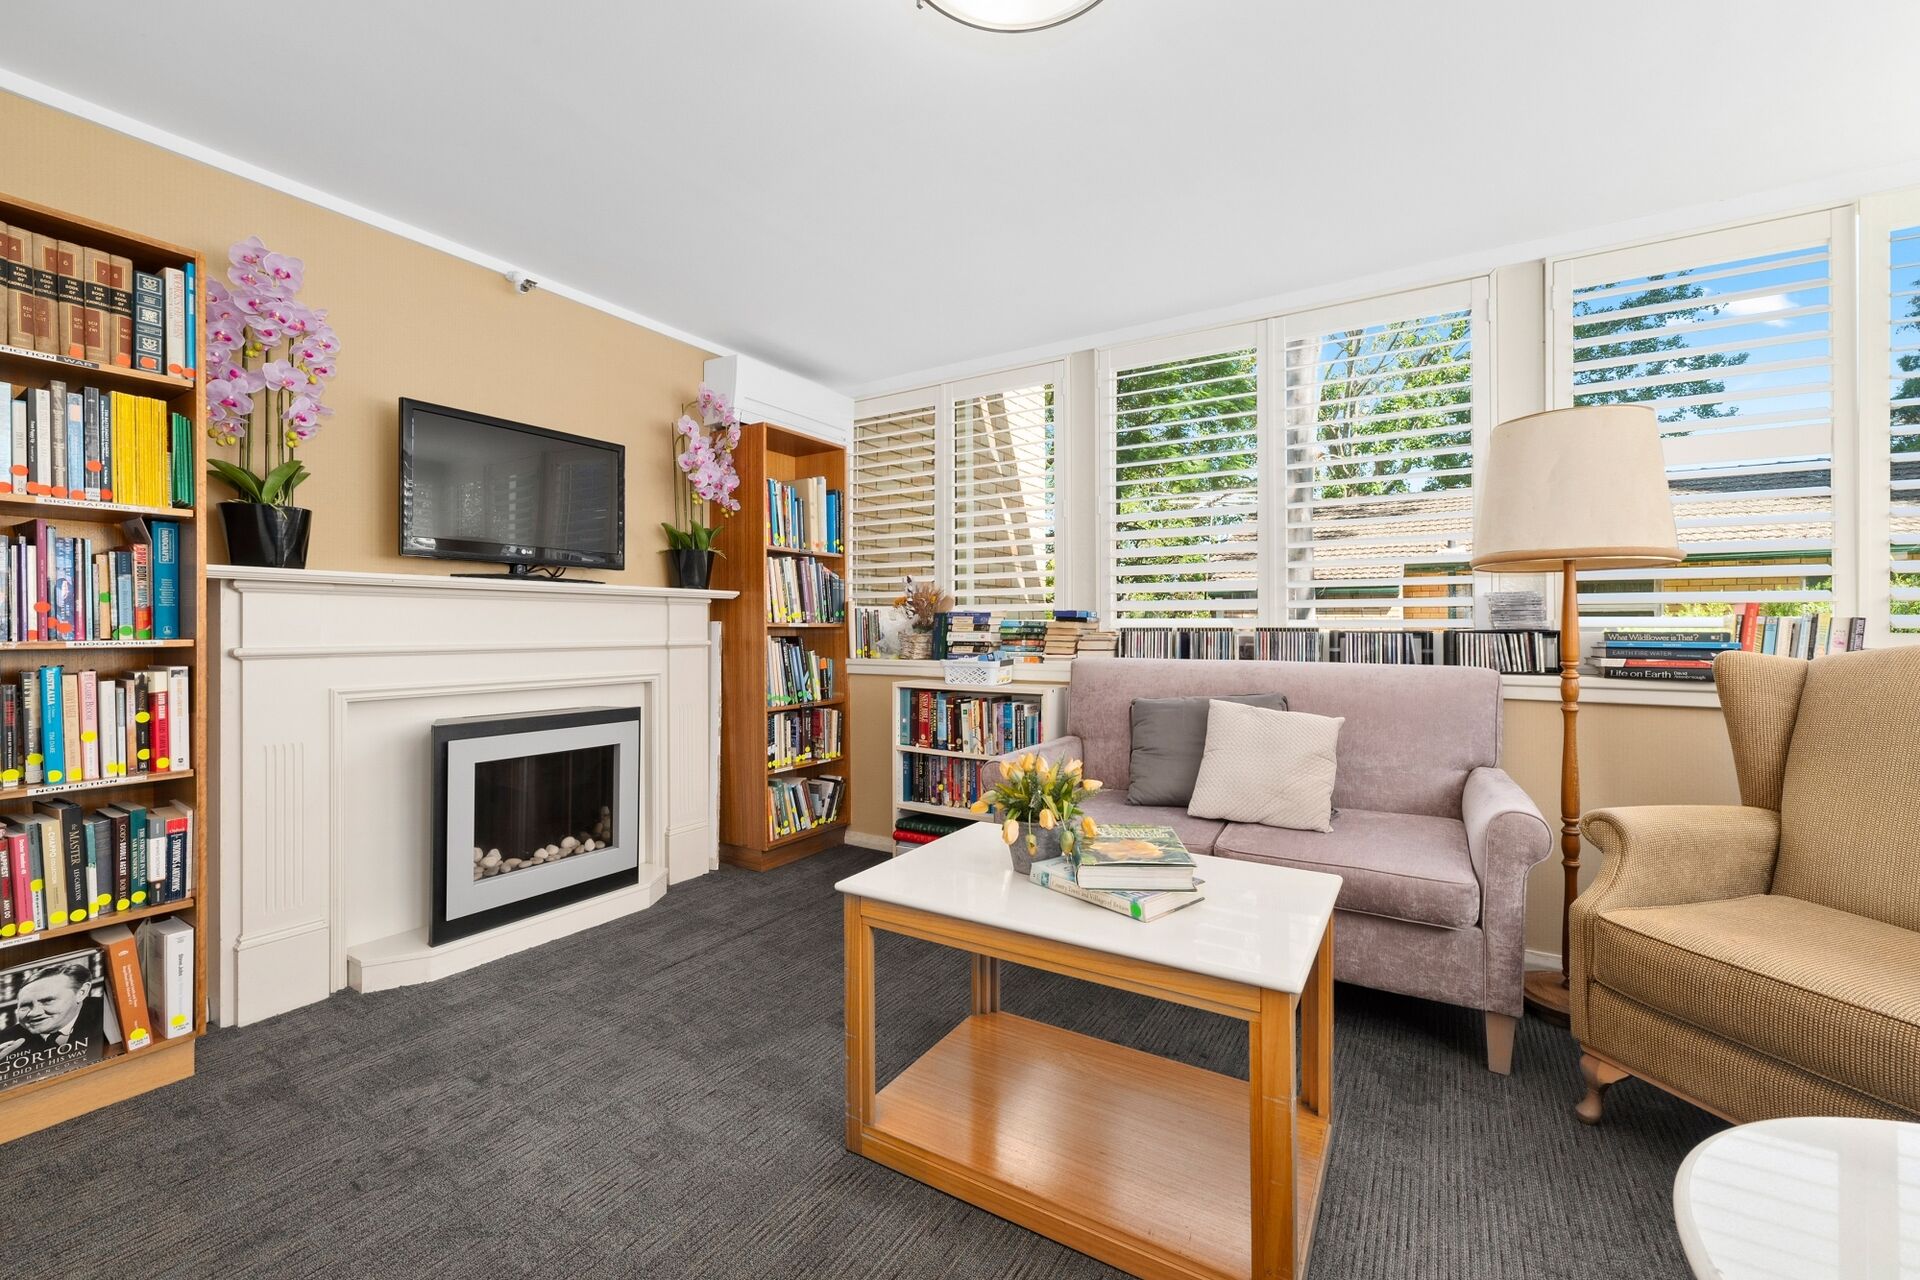 welcoming library for aged care residents at baptistcare cooinda court residential aged care home in macquarie park northern sydney